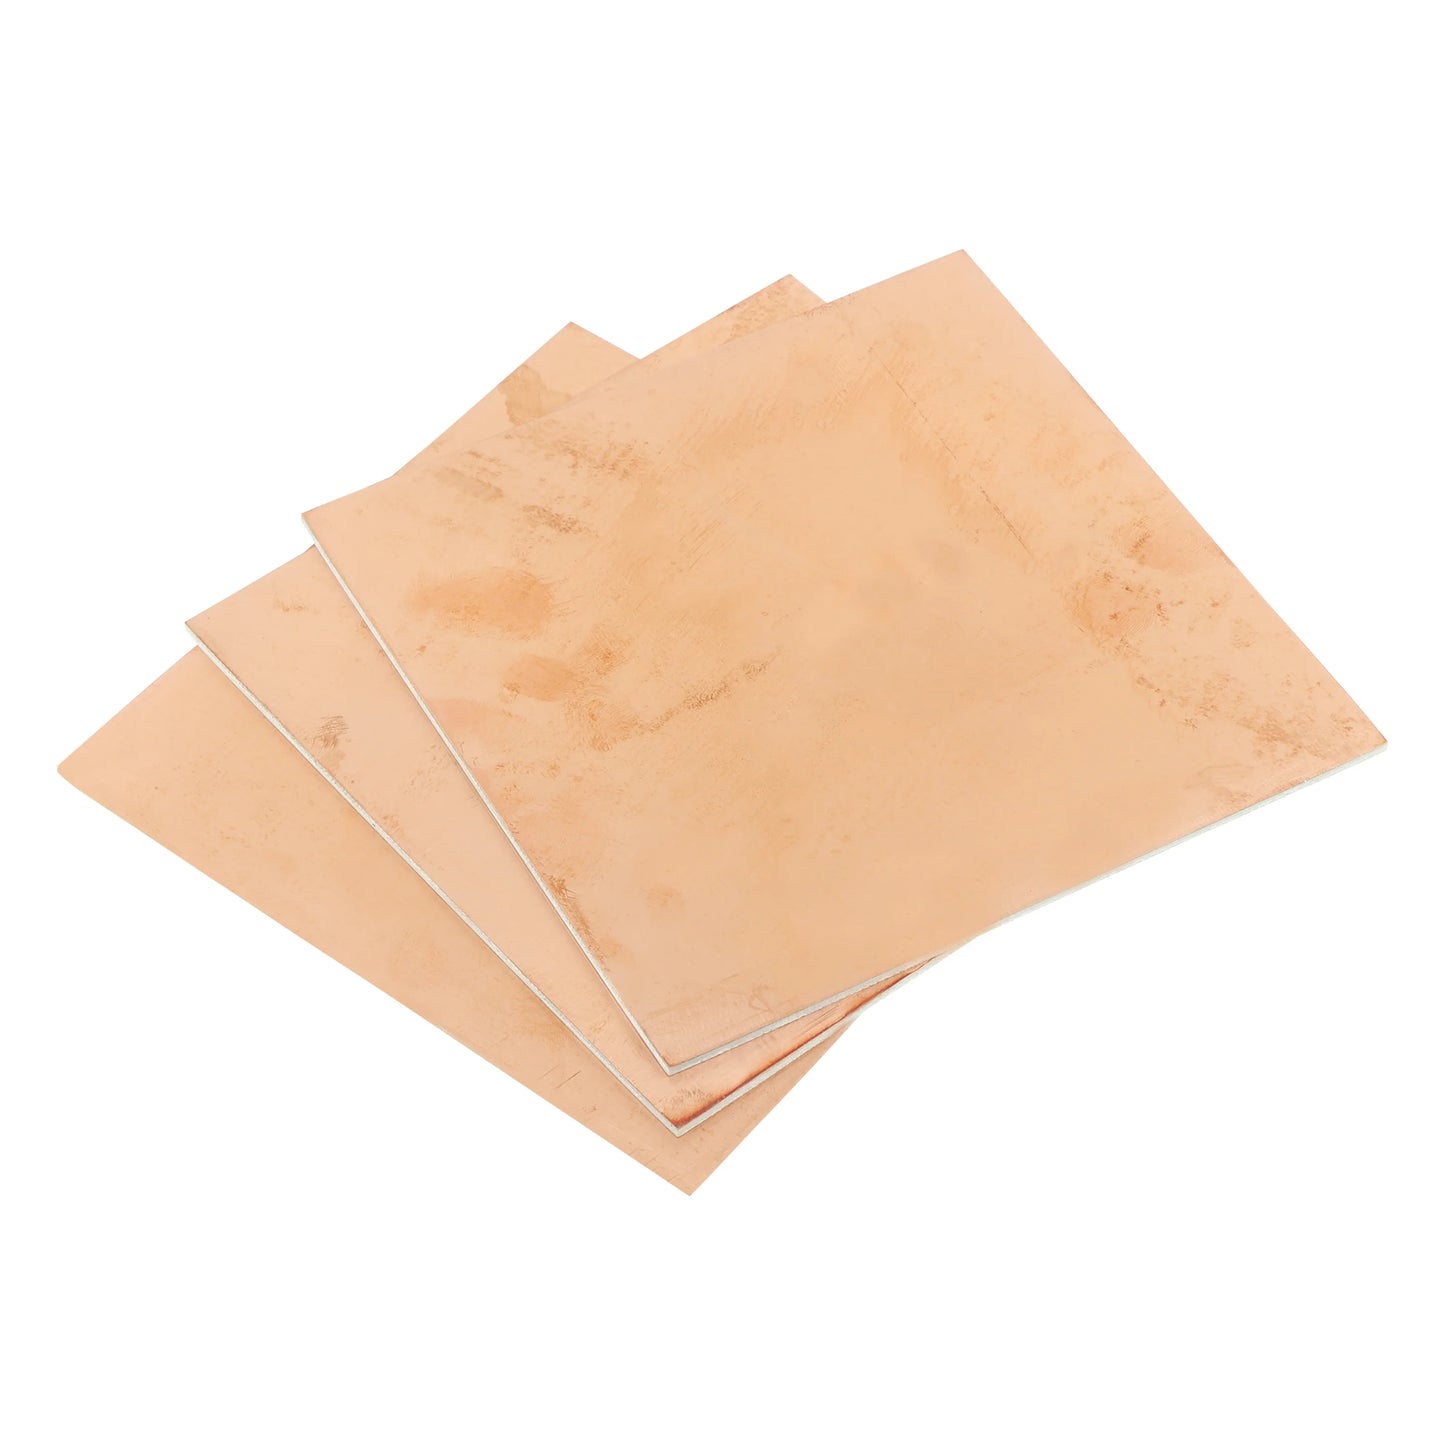 1.6 mm Thick DOUBLE Sided Copper Clad Laminate Circuit Board 6 x 6 Inch (FR4 Glass Epoxy PCB) - 5 Units